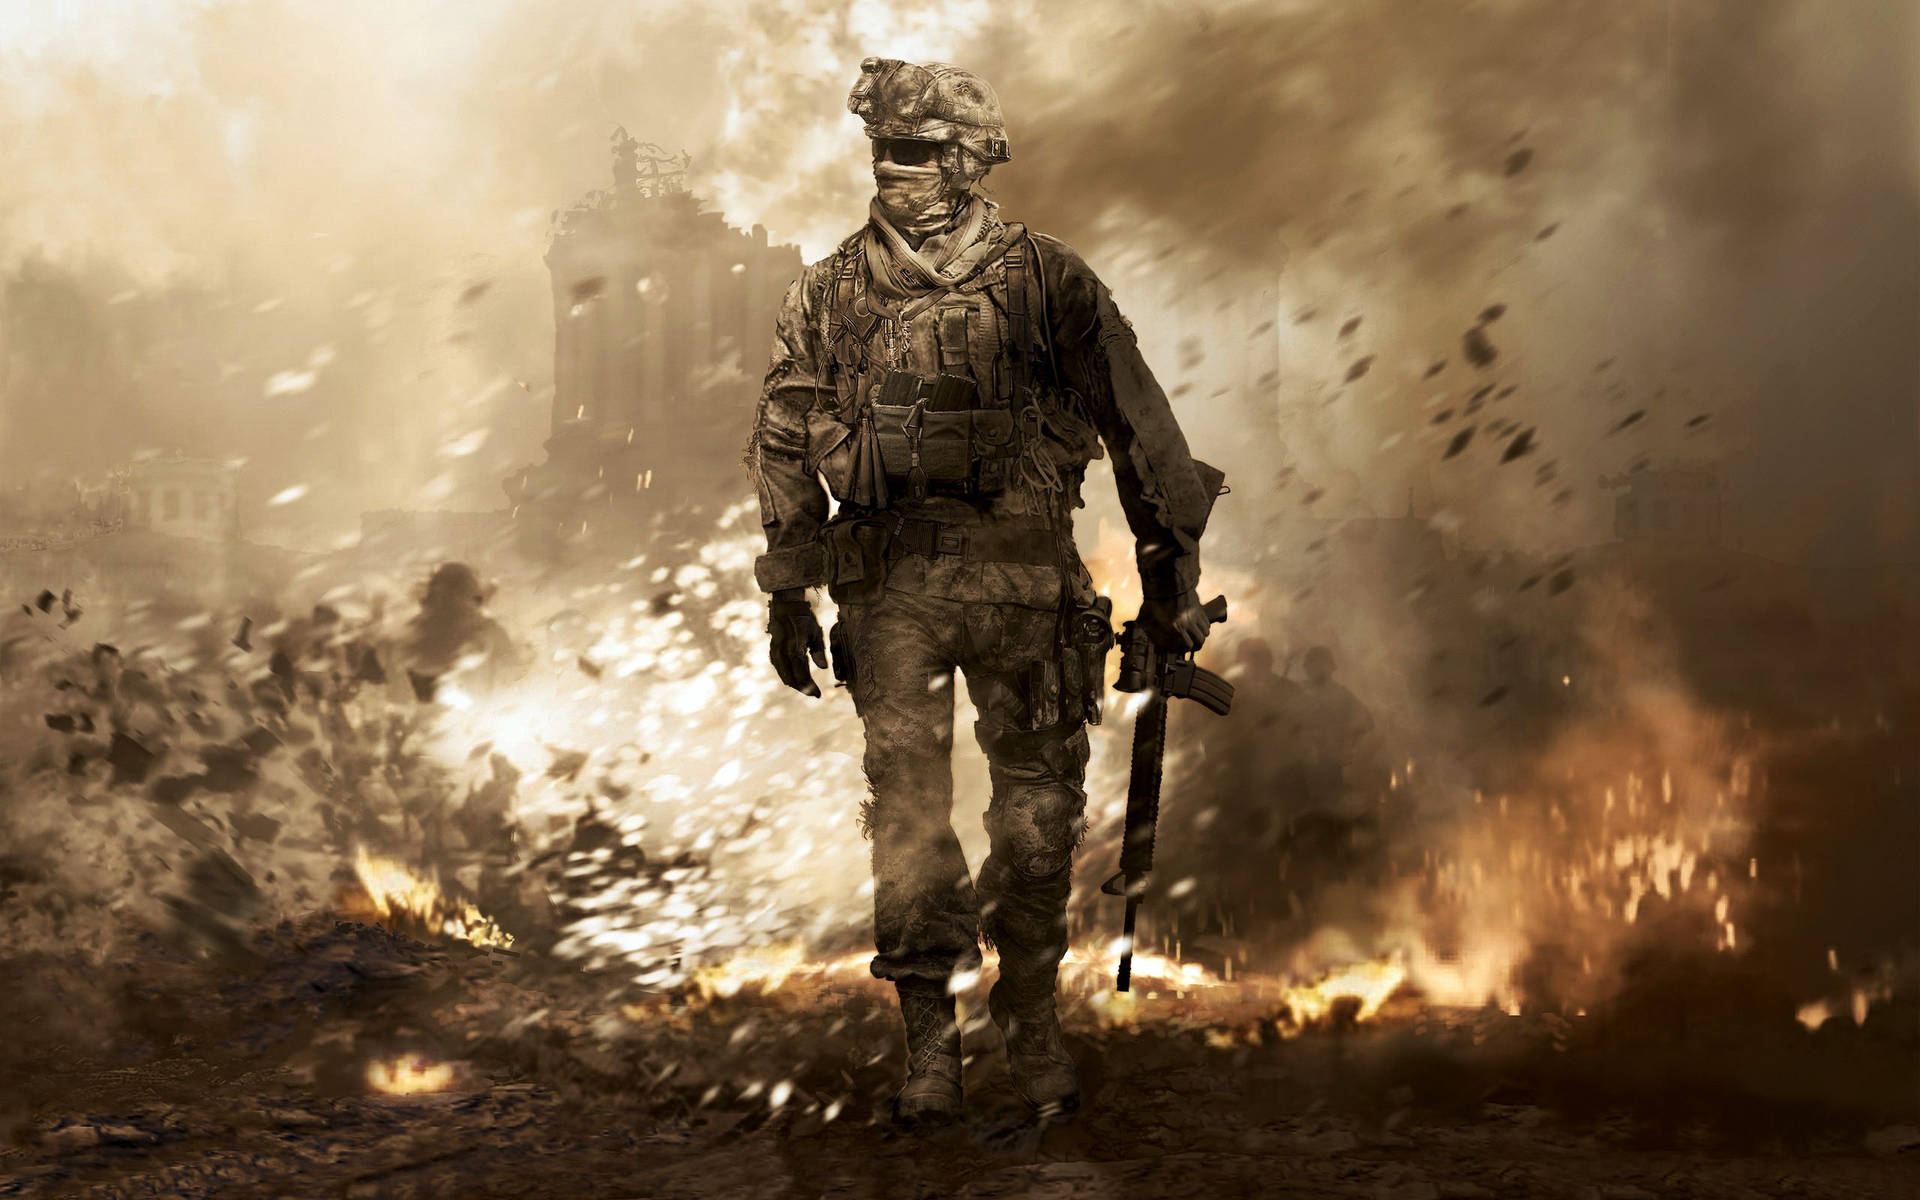 Brave Soldier Facing Down The Enemy In Call Of Duty Background